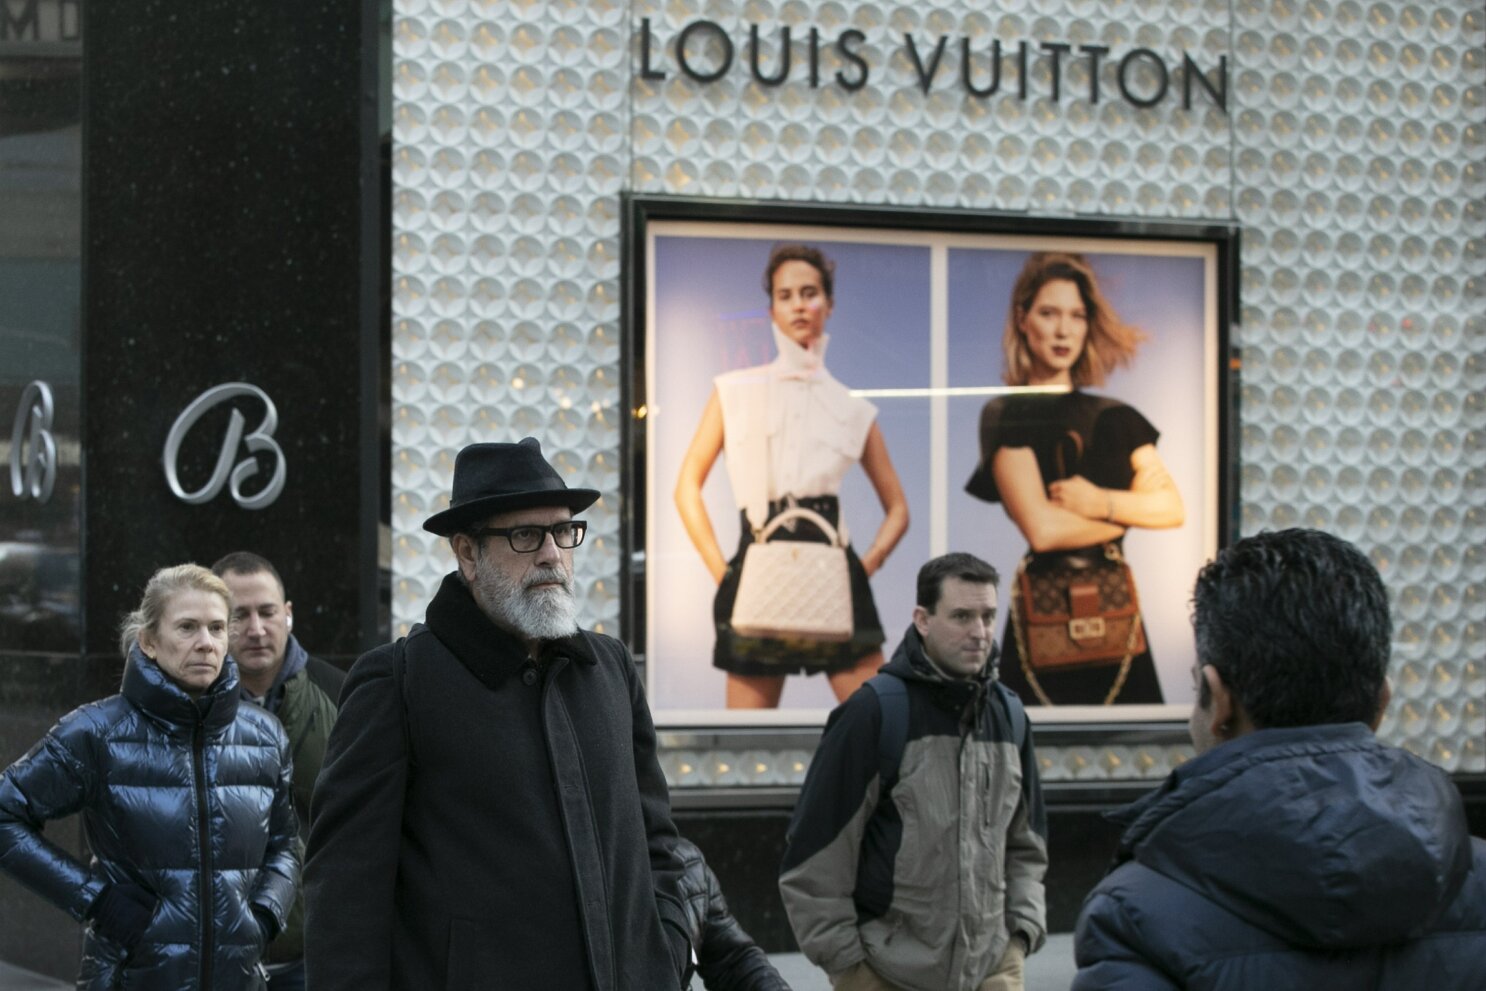 LVMH sees share price jump as owner visits China - Global Times